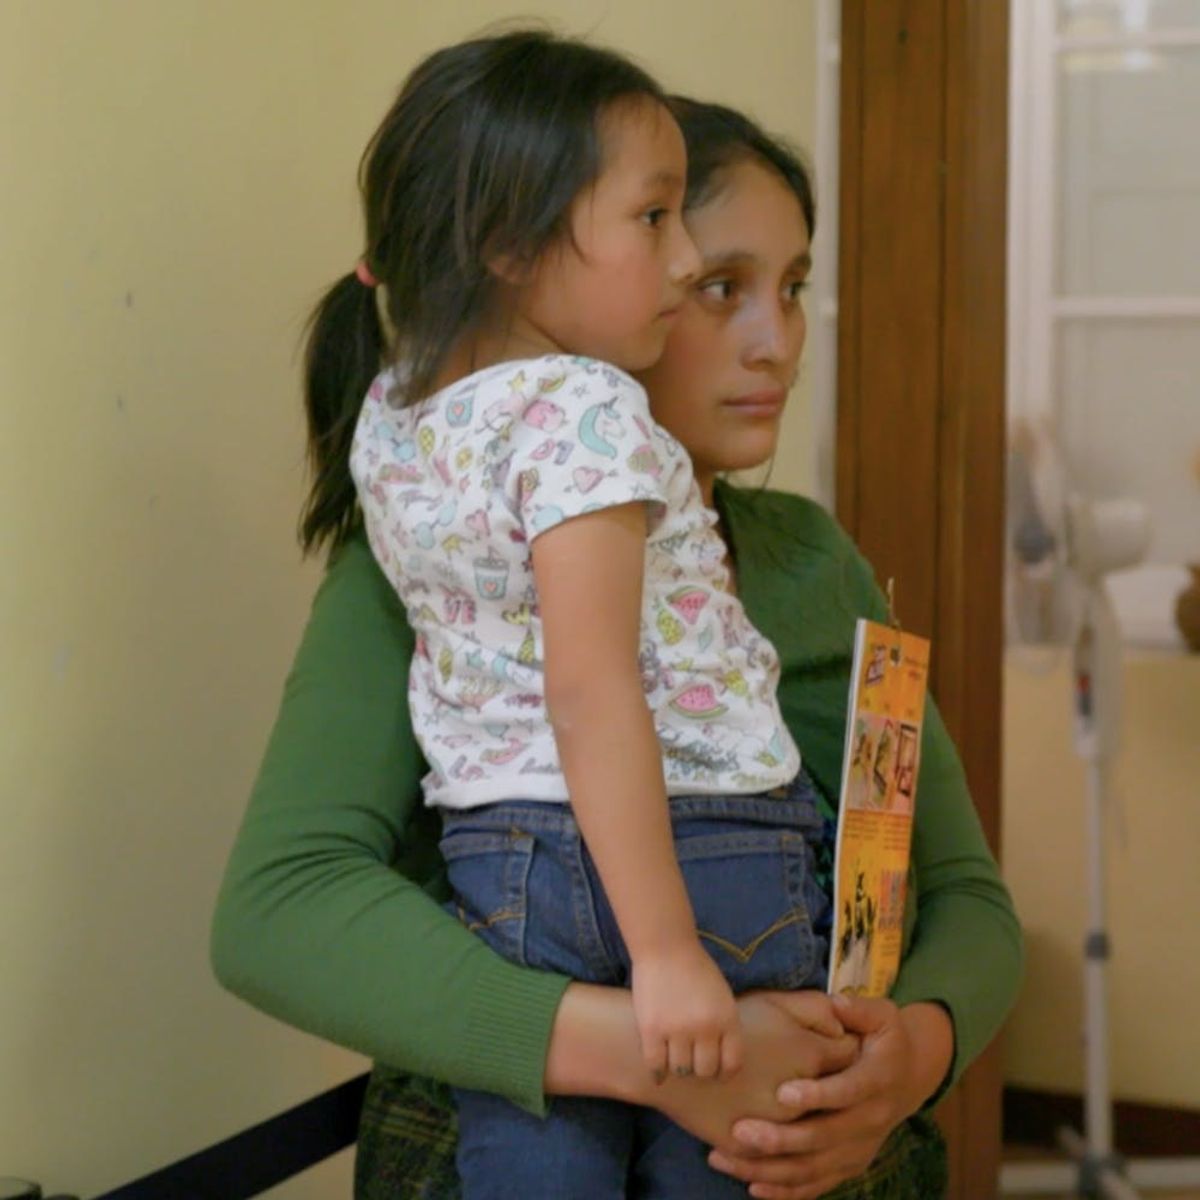 VIDEO: 6-Year-Old Guatemalan Girl Reunites With Her Parents After 7-Month Detention by US